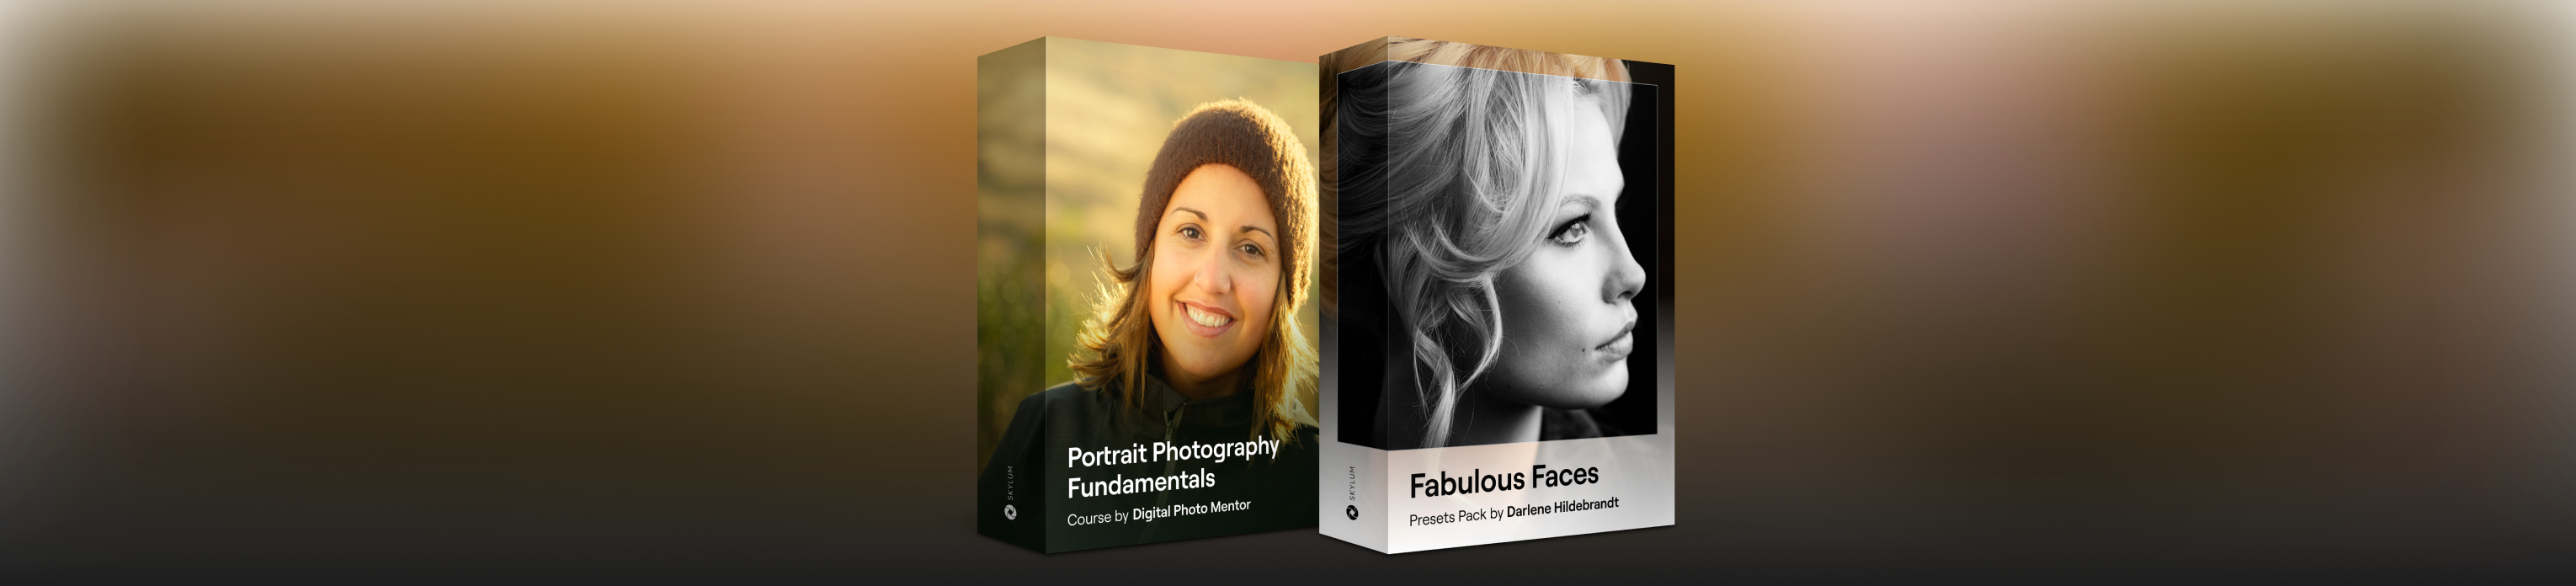 Portrait Photography Fundamentals Course by Digital Photo Mentor(8)